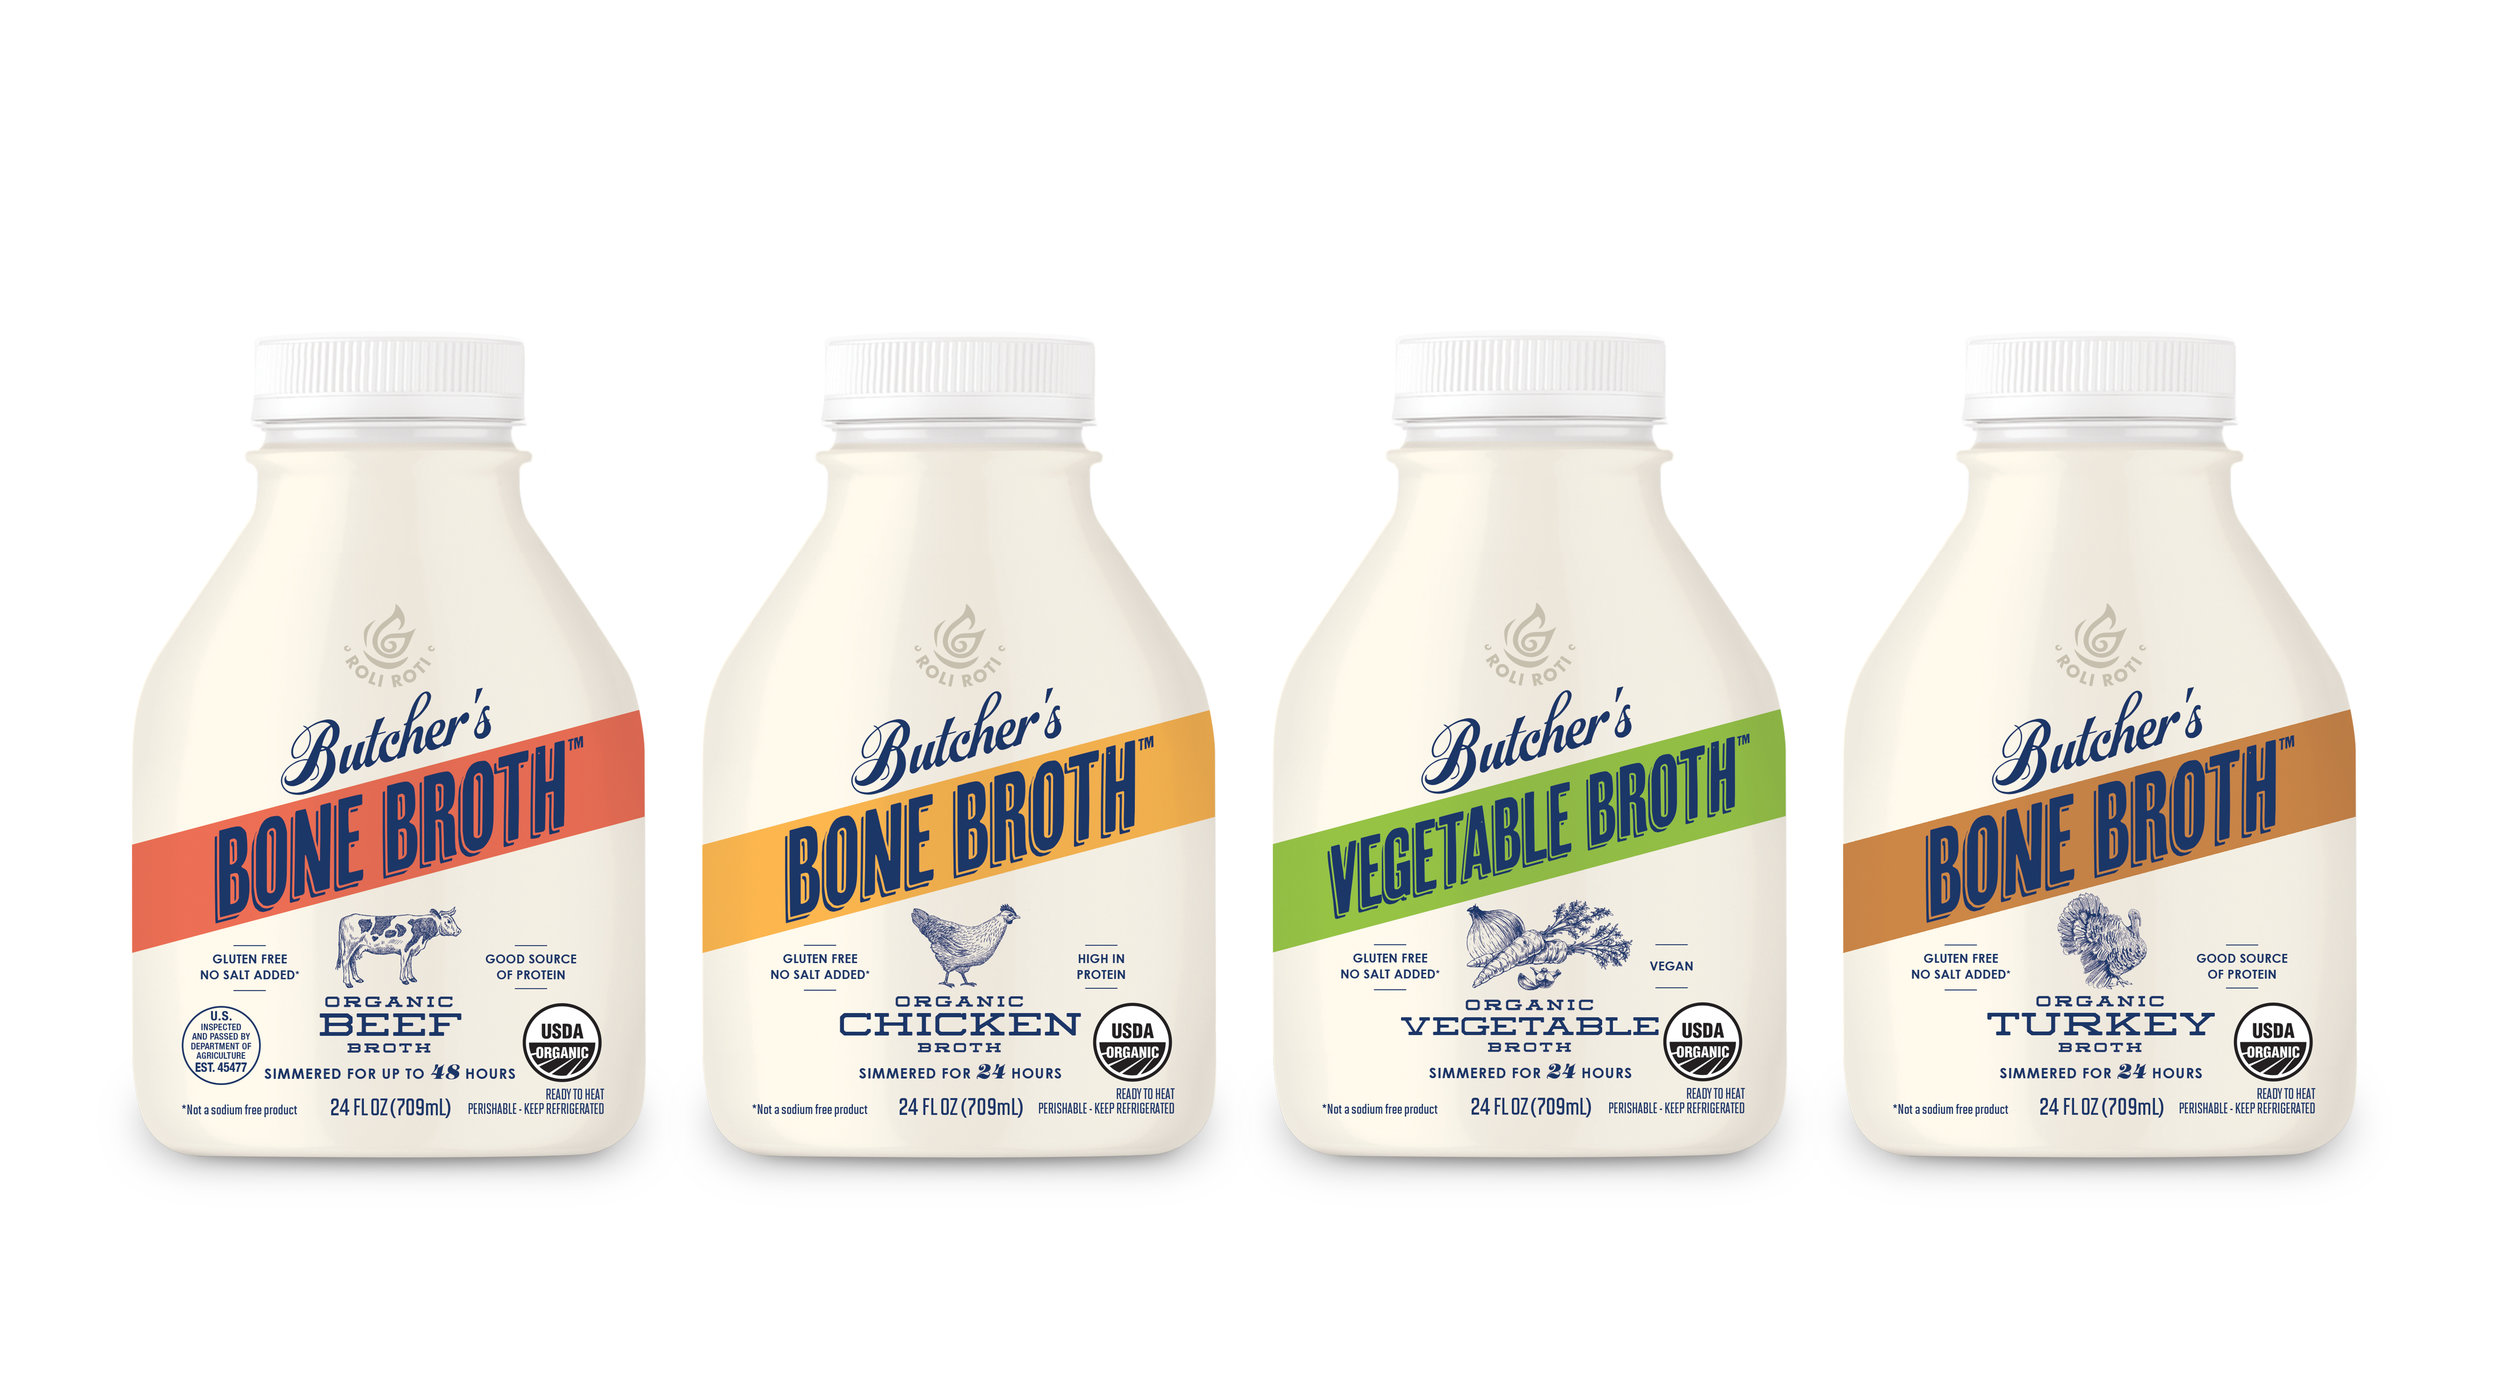 Creative Packaging Design for New Brand ‘Butcher’s Bone Broth’